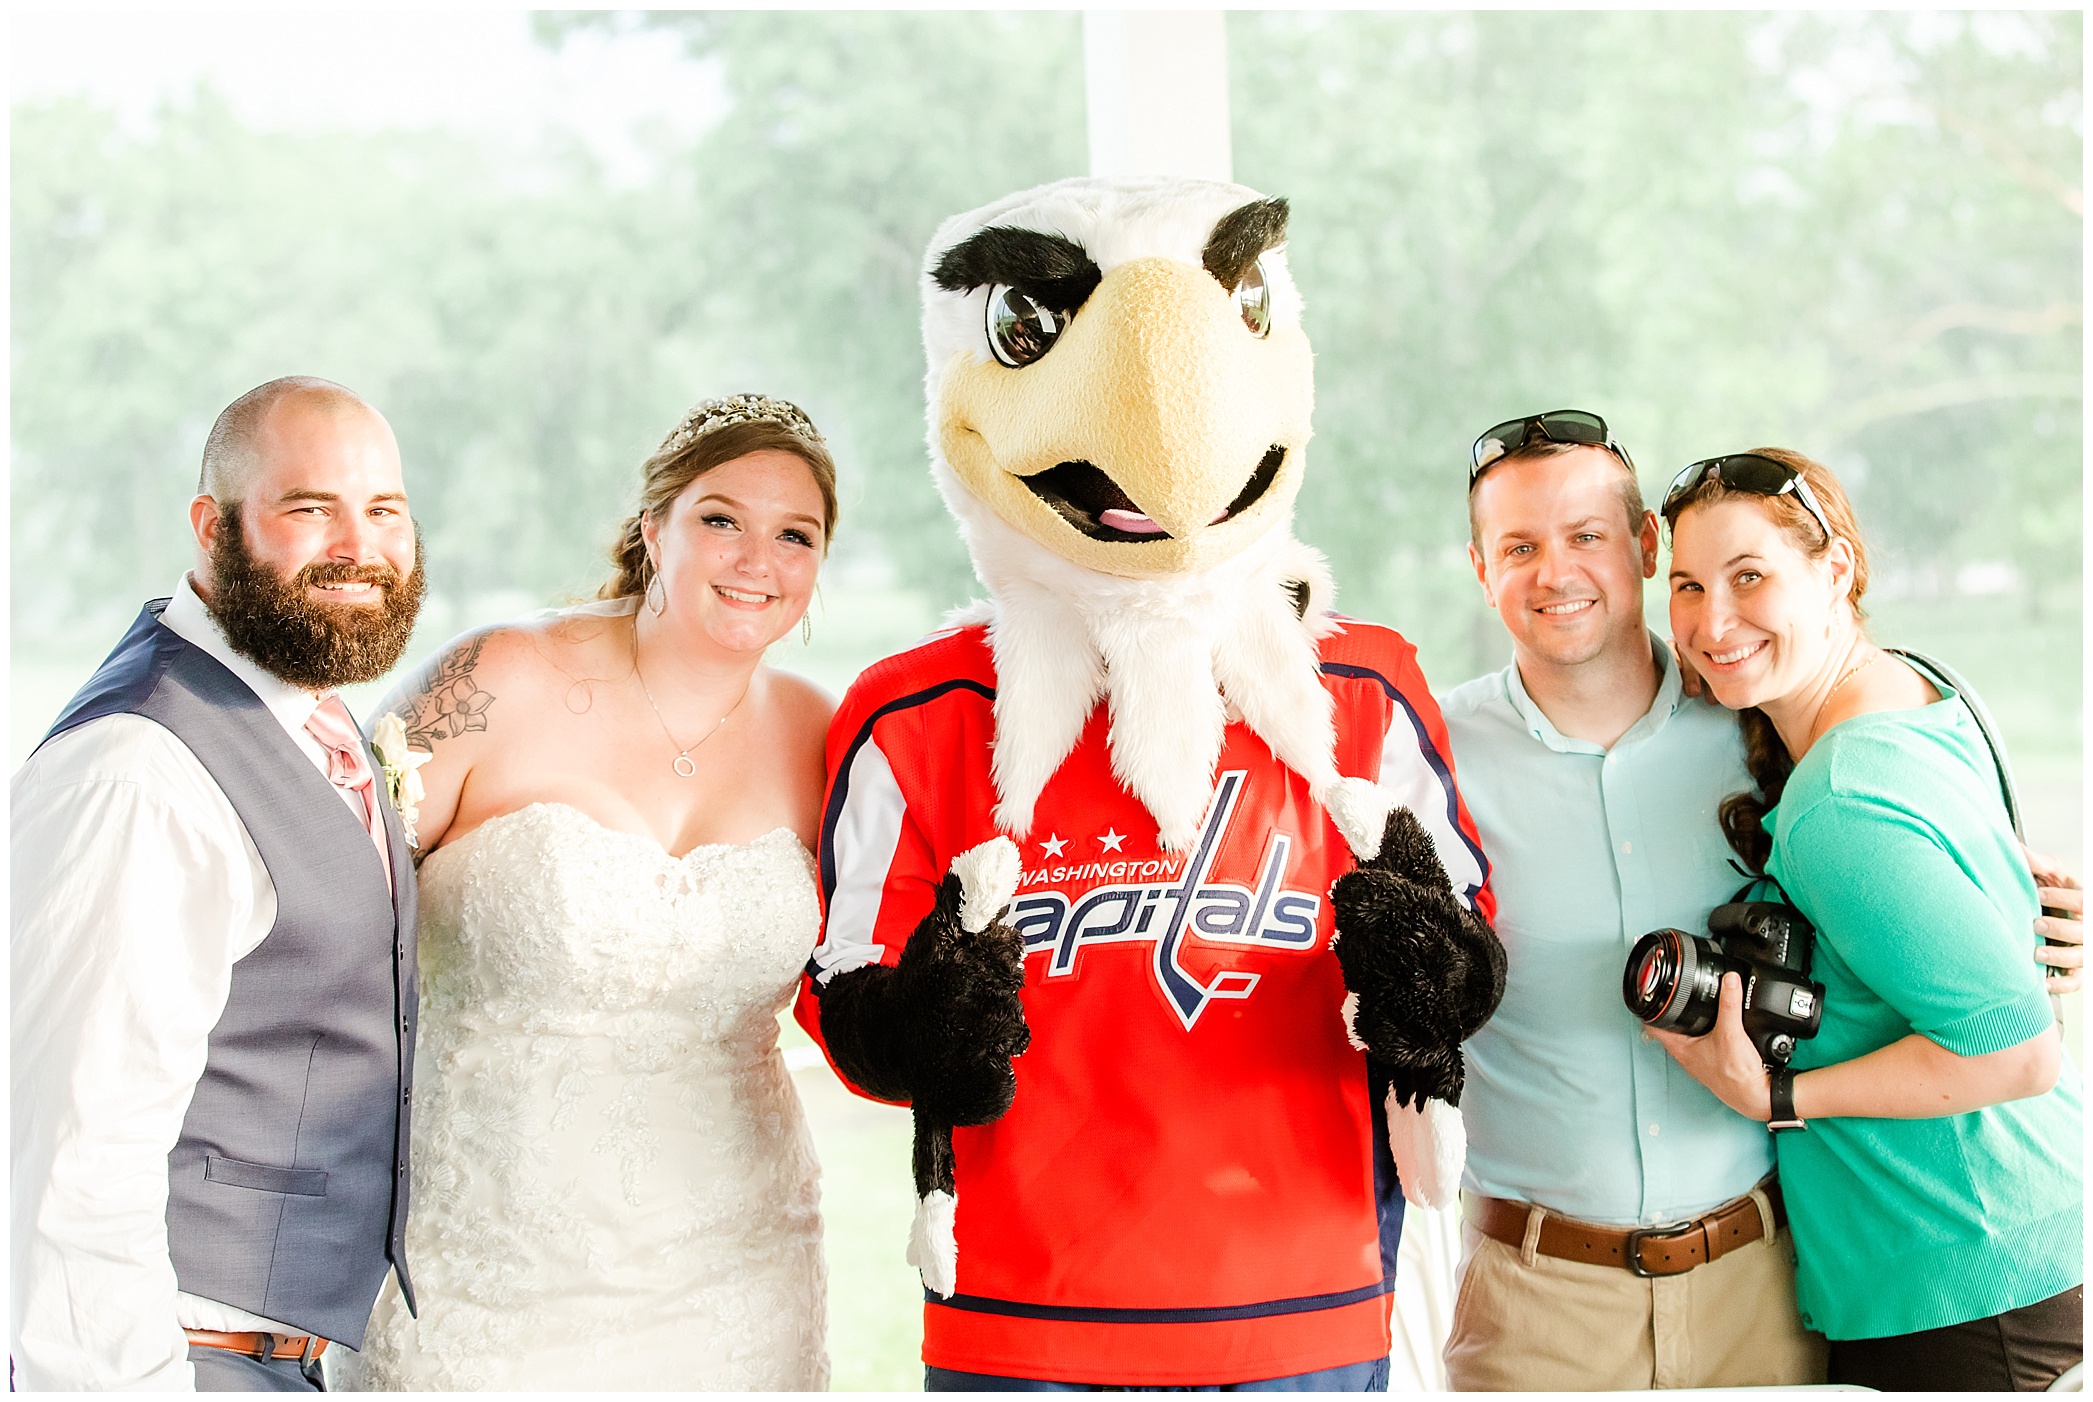  Hunter is a huge Capitals fan too! We had to get a group picture with Slapshot!  